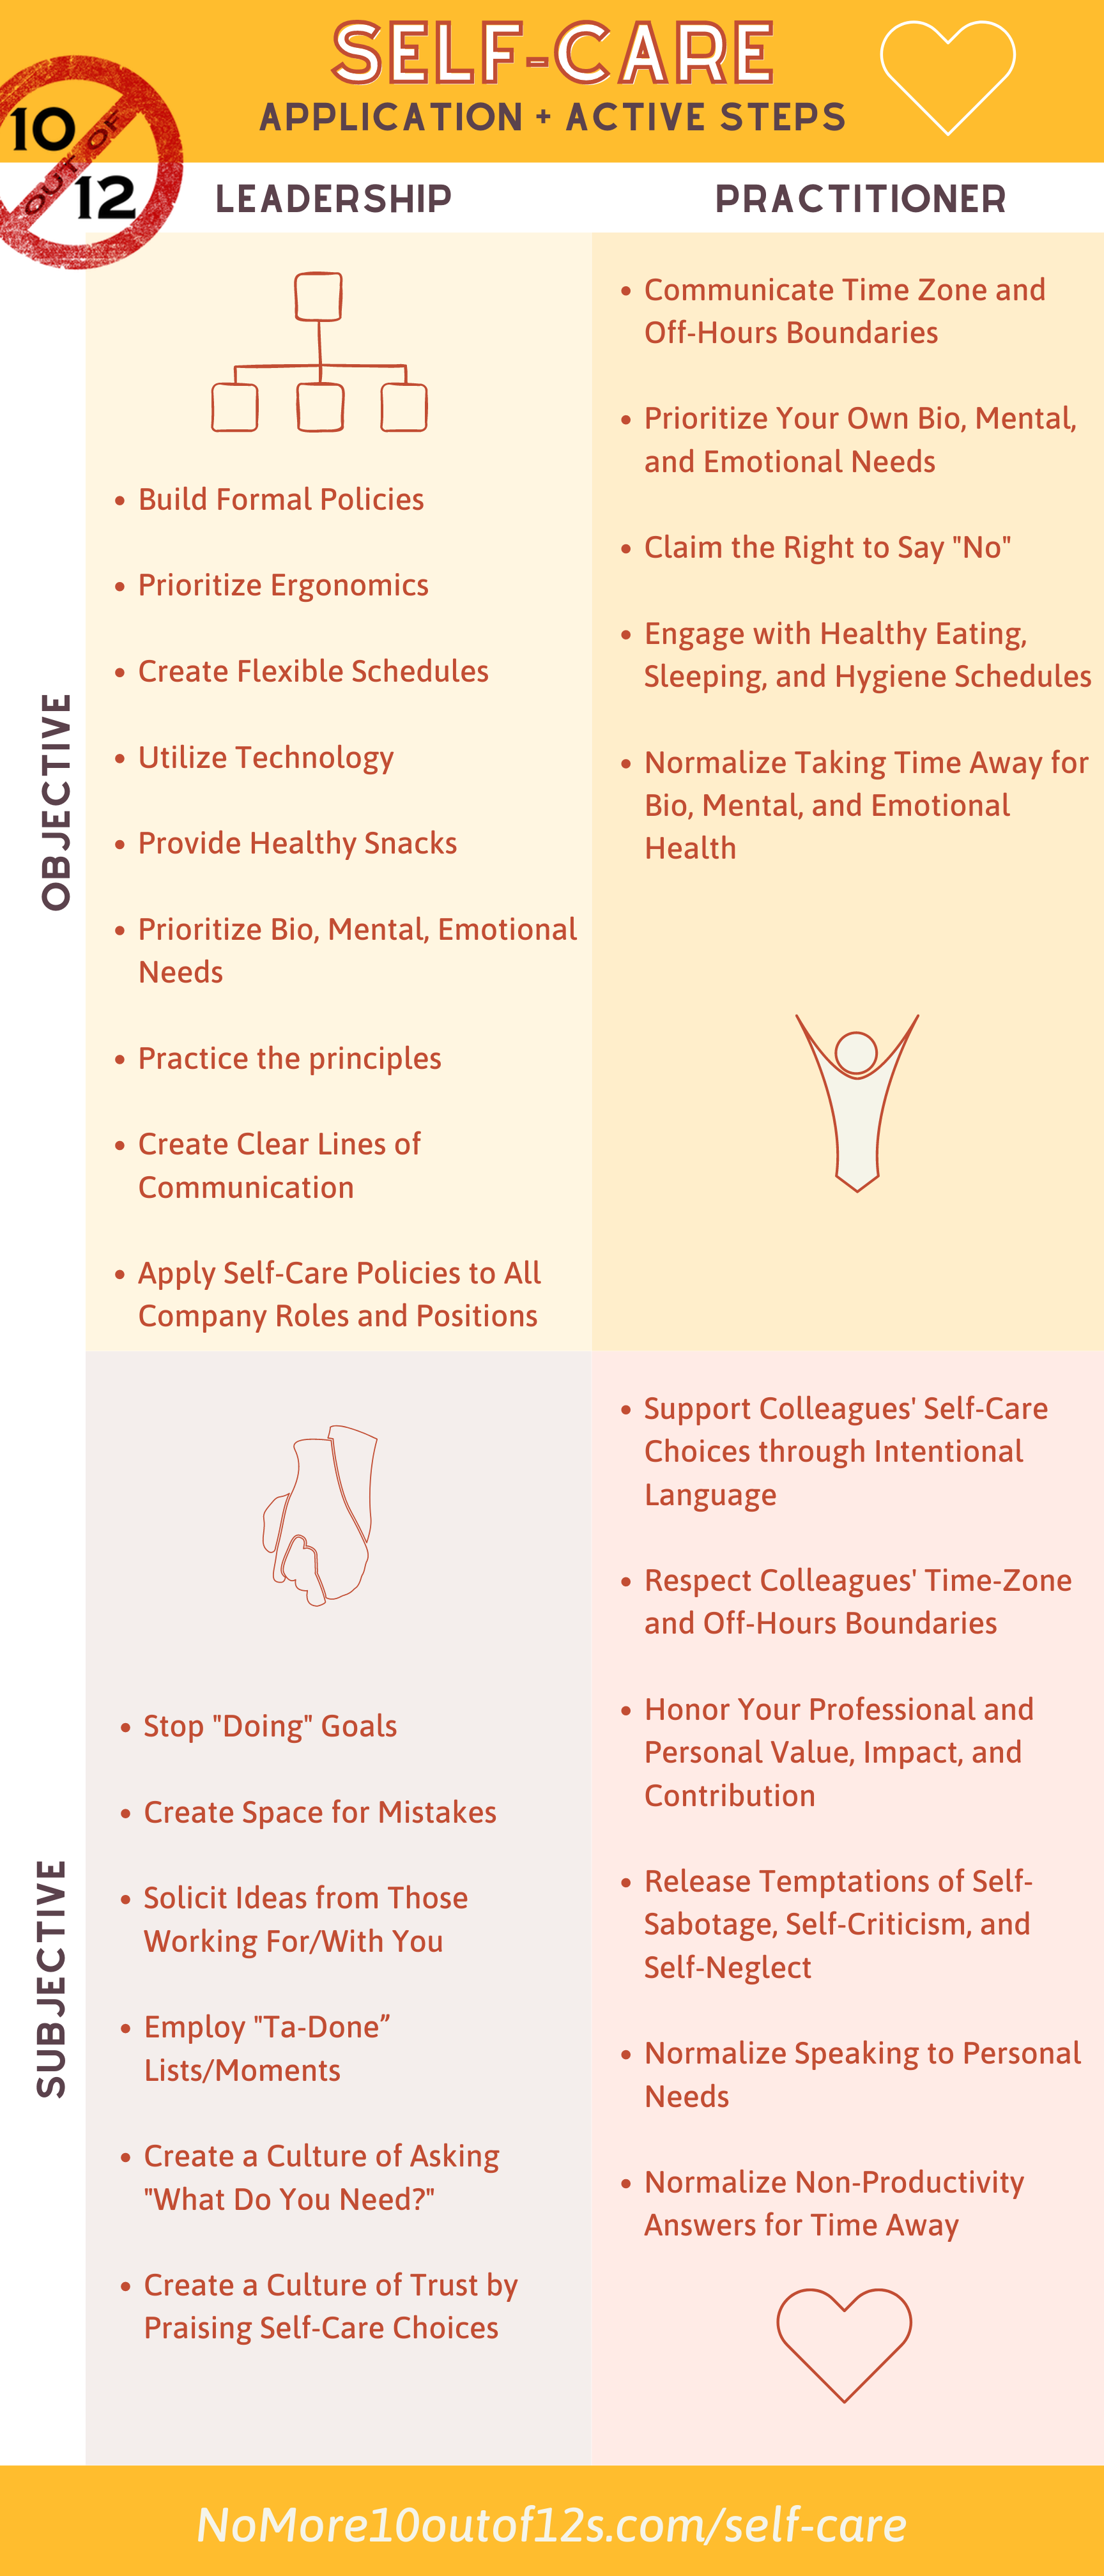 Self-Care Application + Active Steps. Leadership - Objective: Build Formal Policies, Prioritize Ergonomics, Create Flexible Schedules, Utilize Technology, Provide Healthy Snacks, Prioritize Bio Mental Emotional Needs, Practice The Principles, Create Clear Lines Of Communication, Apply Self-Care, Policies to All Company Roles and Positions. Leadership: Subjective - Stop "Doing" Goals, Create Space for Mistakes, Solicit Ideas From Those Working For/With You, Employ "Ta Done" List/Moments, Create A Culture Of Asking "What Do You Need?", Create A Culture of Trust By Praising Self-Care Choices. Practitioner: Objective - Communicate Time Zone and Off-Hours Boundaries, Prioritize Your Own Bio Mental and Emotional Needs, Claim The Right To Say No, Engage with Healthy Eating, Sleeping and Hygiene Schedules, Normalize Taking Time Away For Bio, Mental and Emotional Health. Practitioner - Subjective: Support Colleagues Self Care Choices through Intentional Language, Respect Colleagues Time-Zome and Off-Hours Boundaries, Honor Your Professional and Personal Value/Impact/Contribution, Release Temptation to Self-Sabotage/Self-Criticism/Self-Neglect, Normalize Speaking to Personal Needs, Normalize Non-Productivity Answers for Time Away